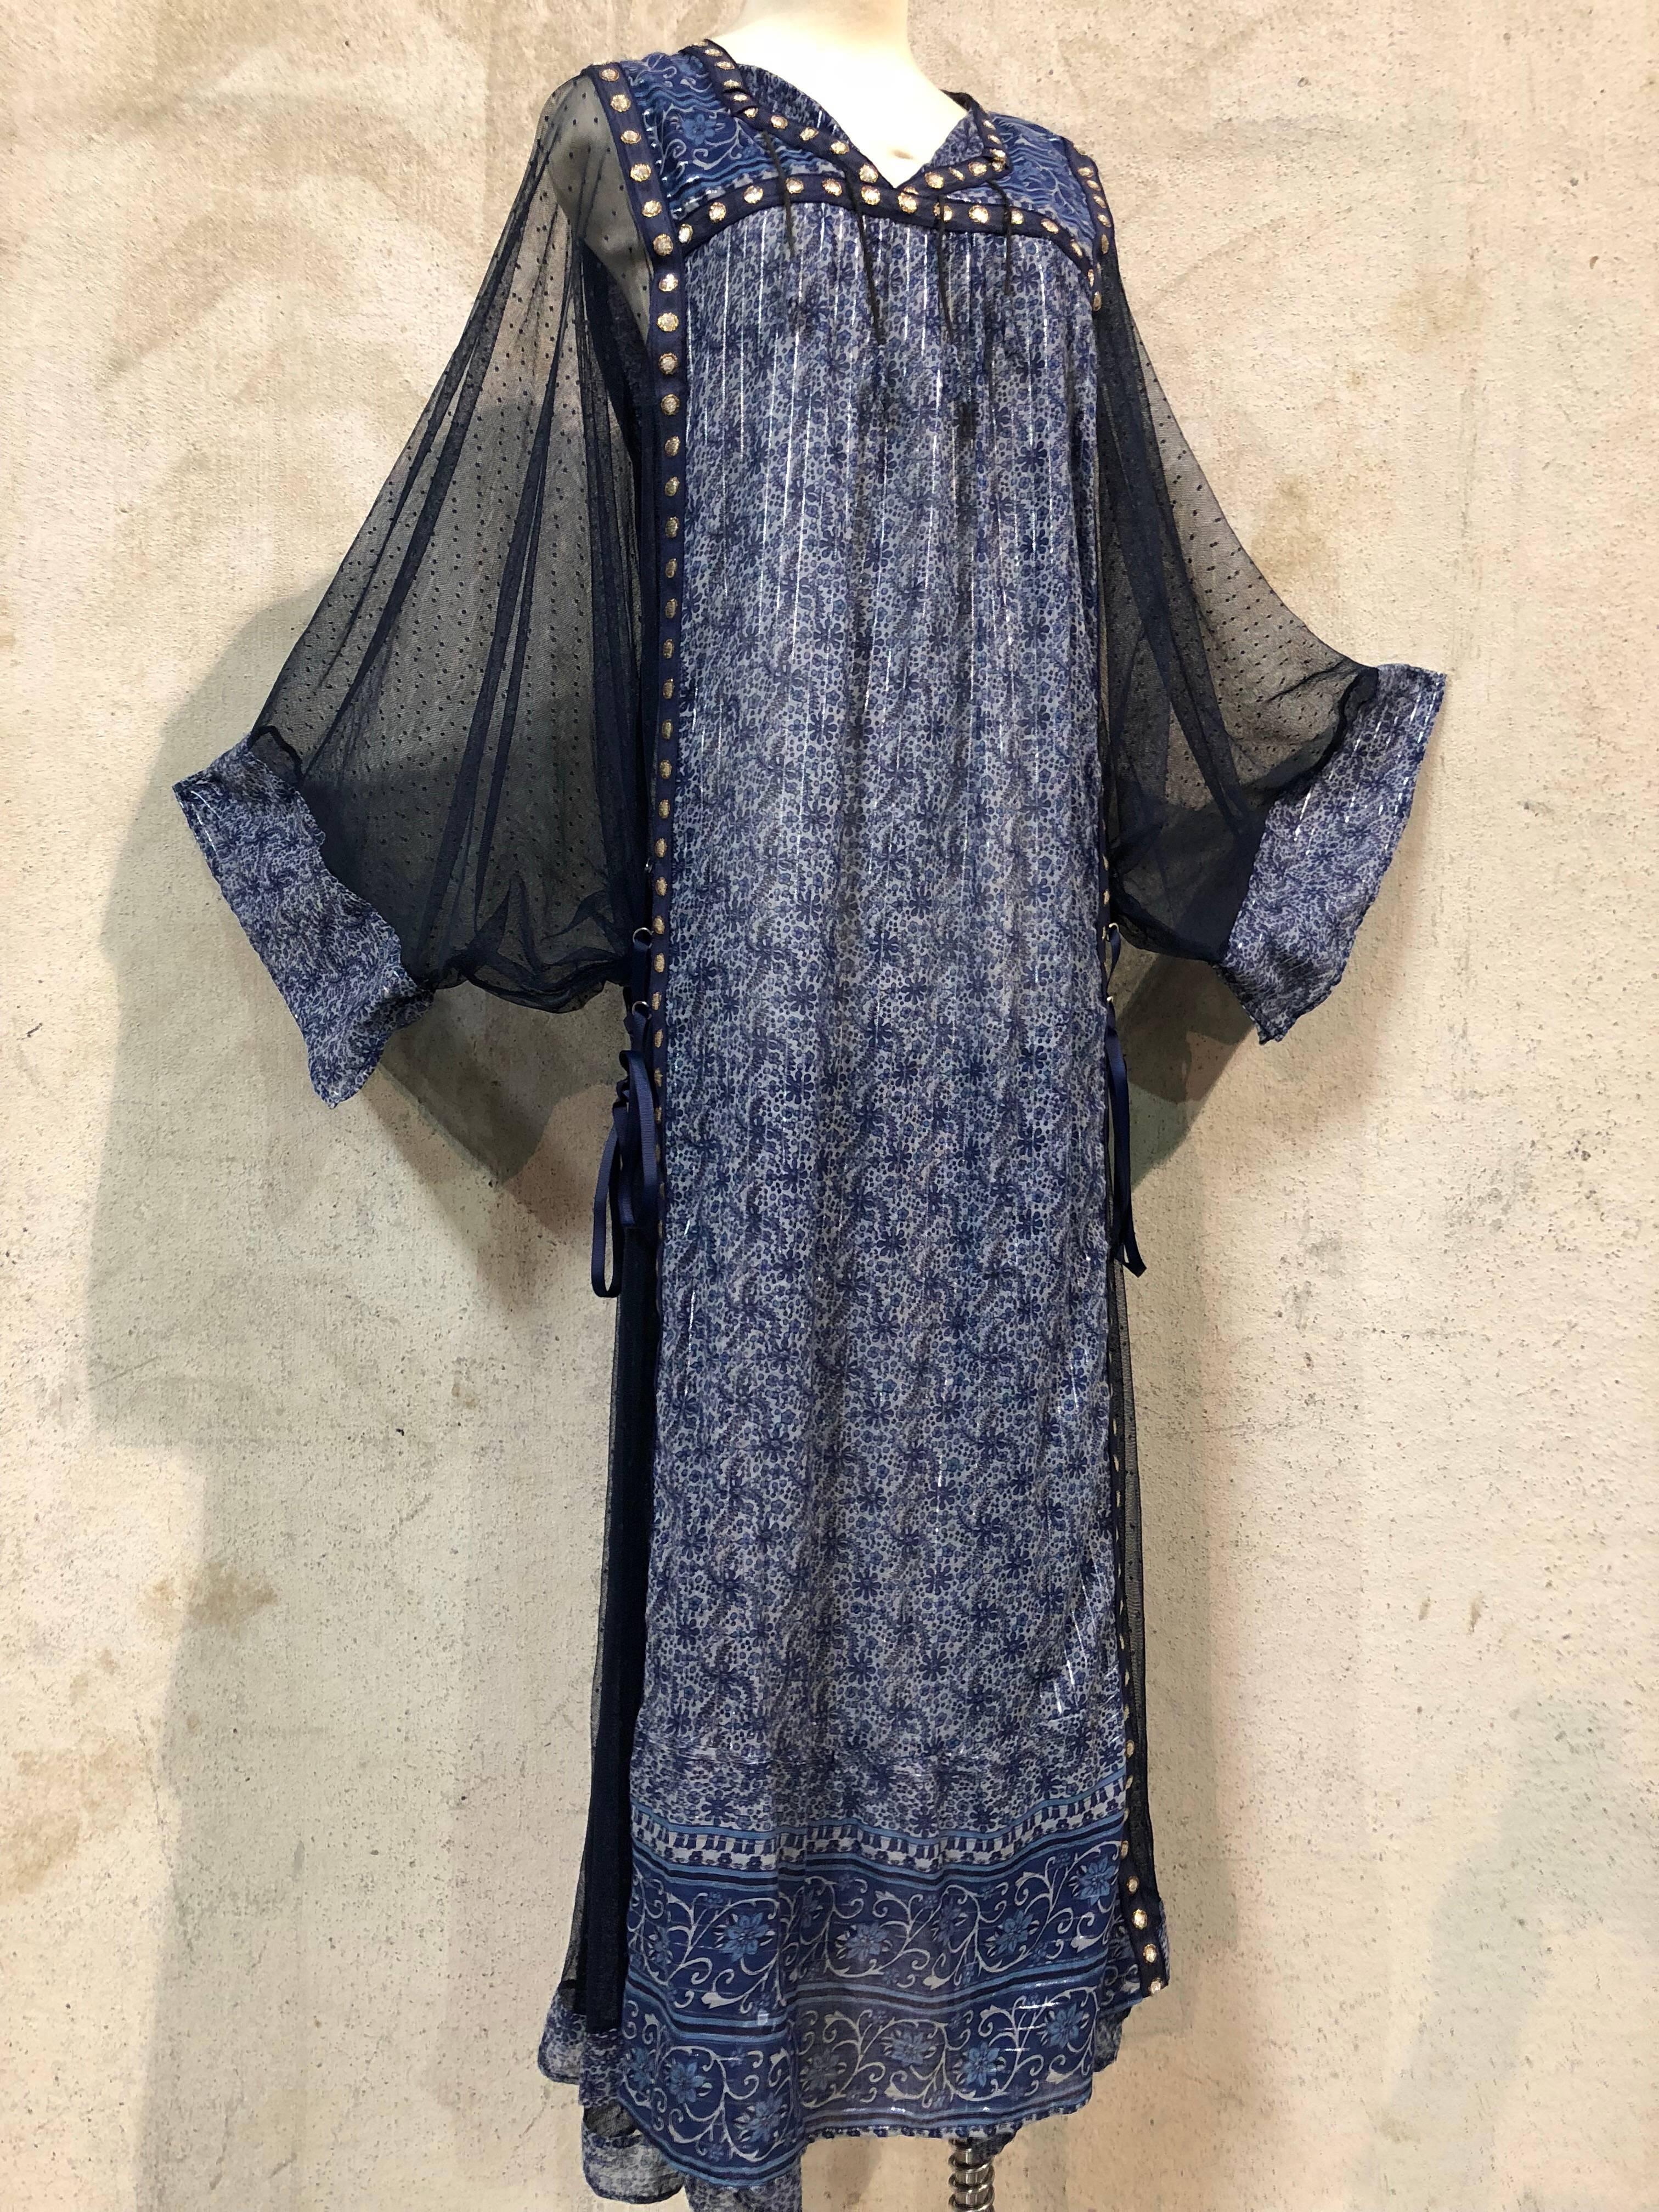 Featured here is a wonderful combination of textiles, mixing a soft sheer cotton print fabric from India and navy dotted net with metallic trim. This boho-style Kaftan features a dual option fit, either laced-up on the sides with ribbon ties for a